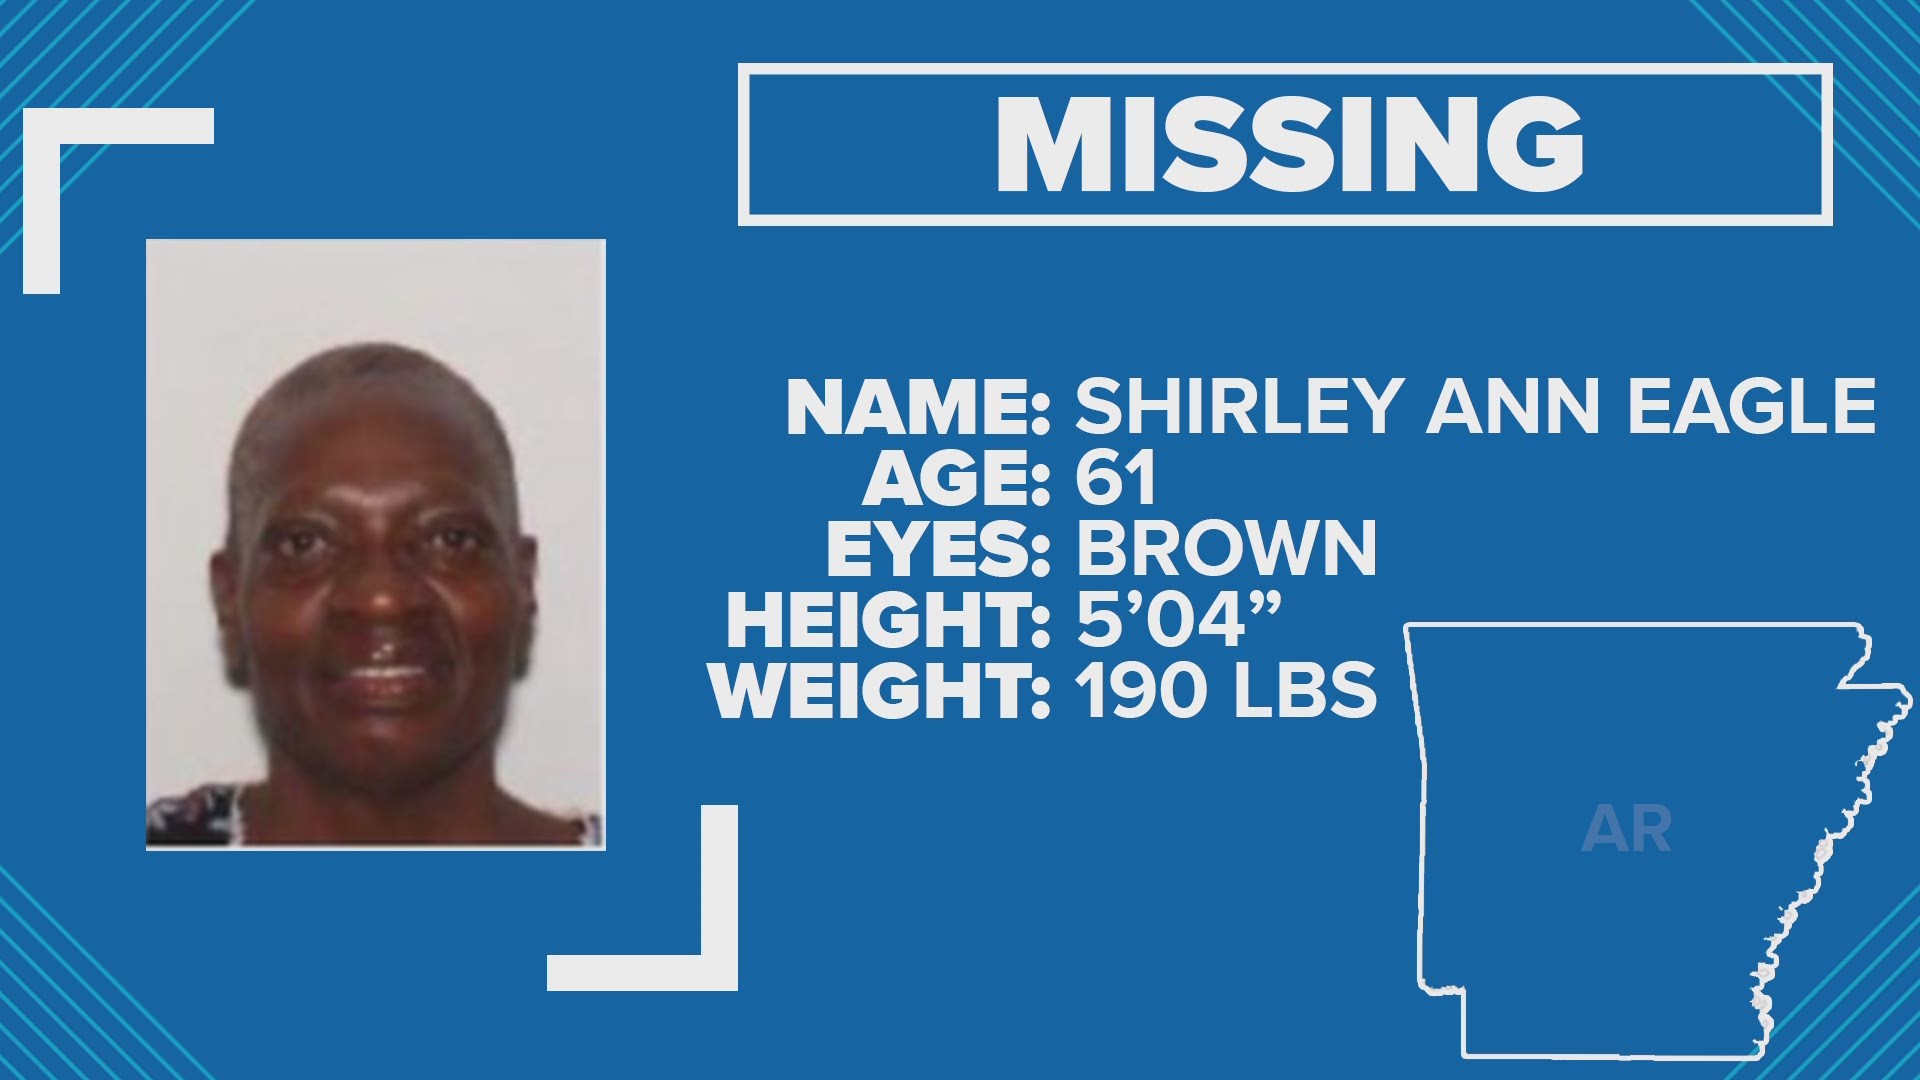 Police say 61-year-old Shirley Ann Eagle was last seen on Sept. 1, 2019.